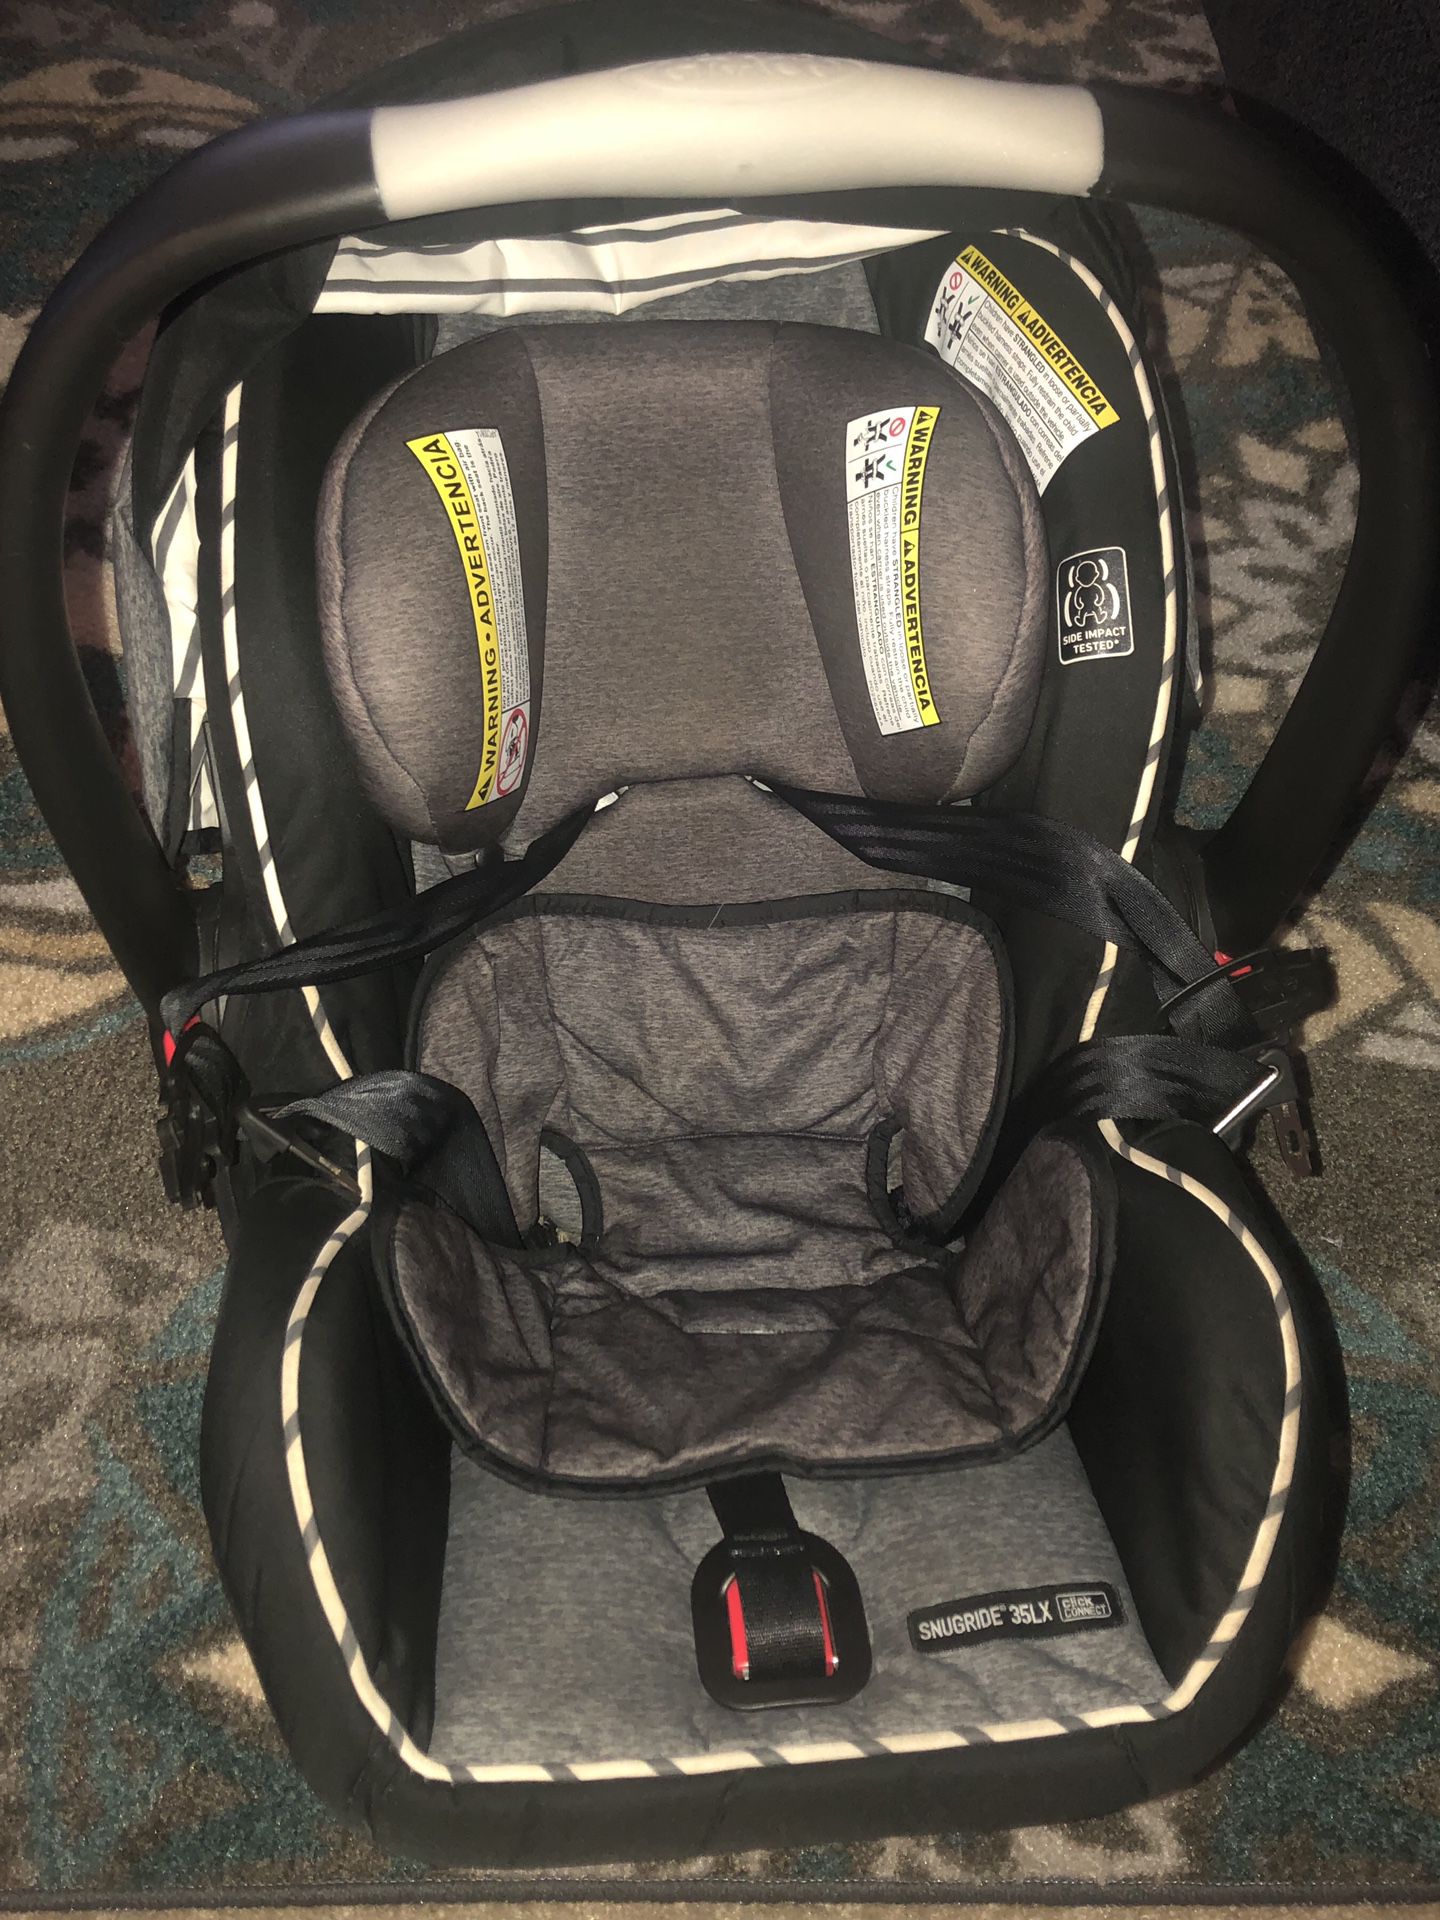 Graco Traveling system